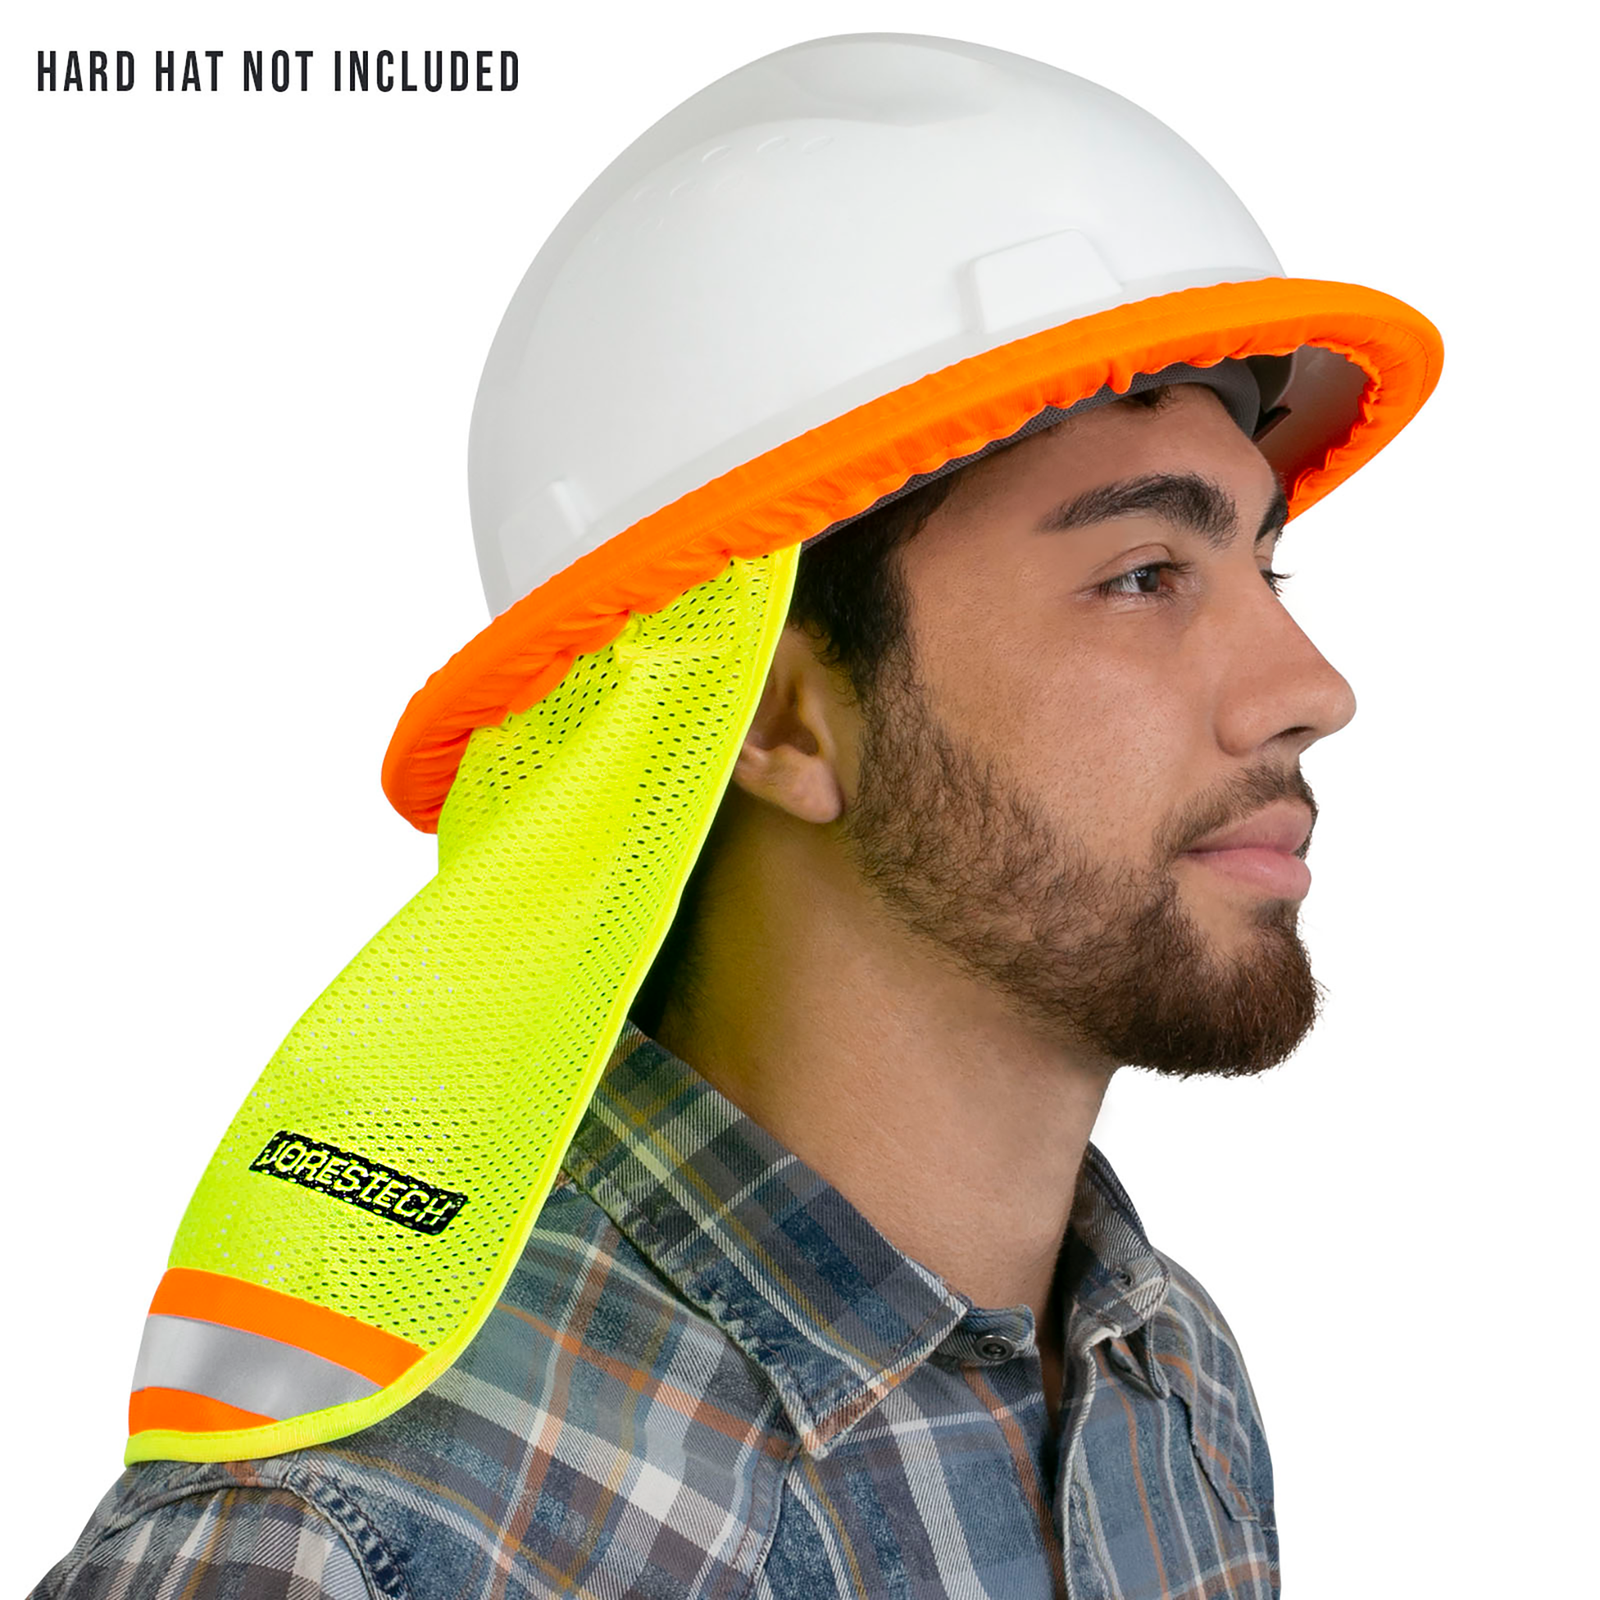 A man wearing a Full brim hard hat with a JORESTECH two tone neck shade